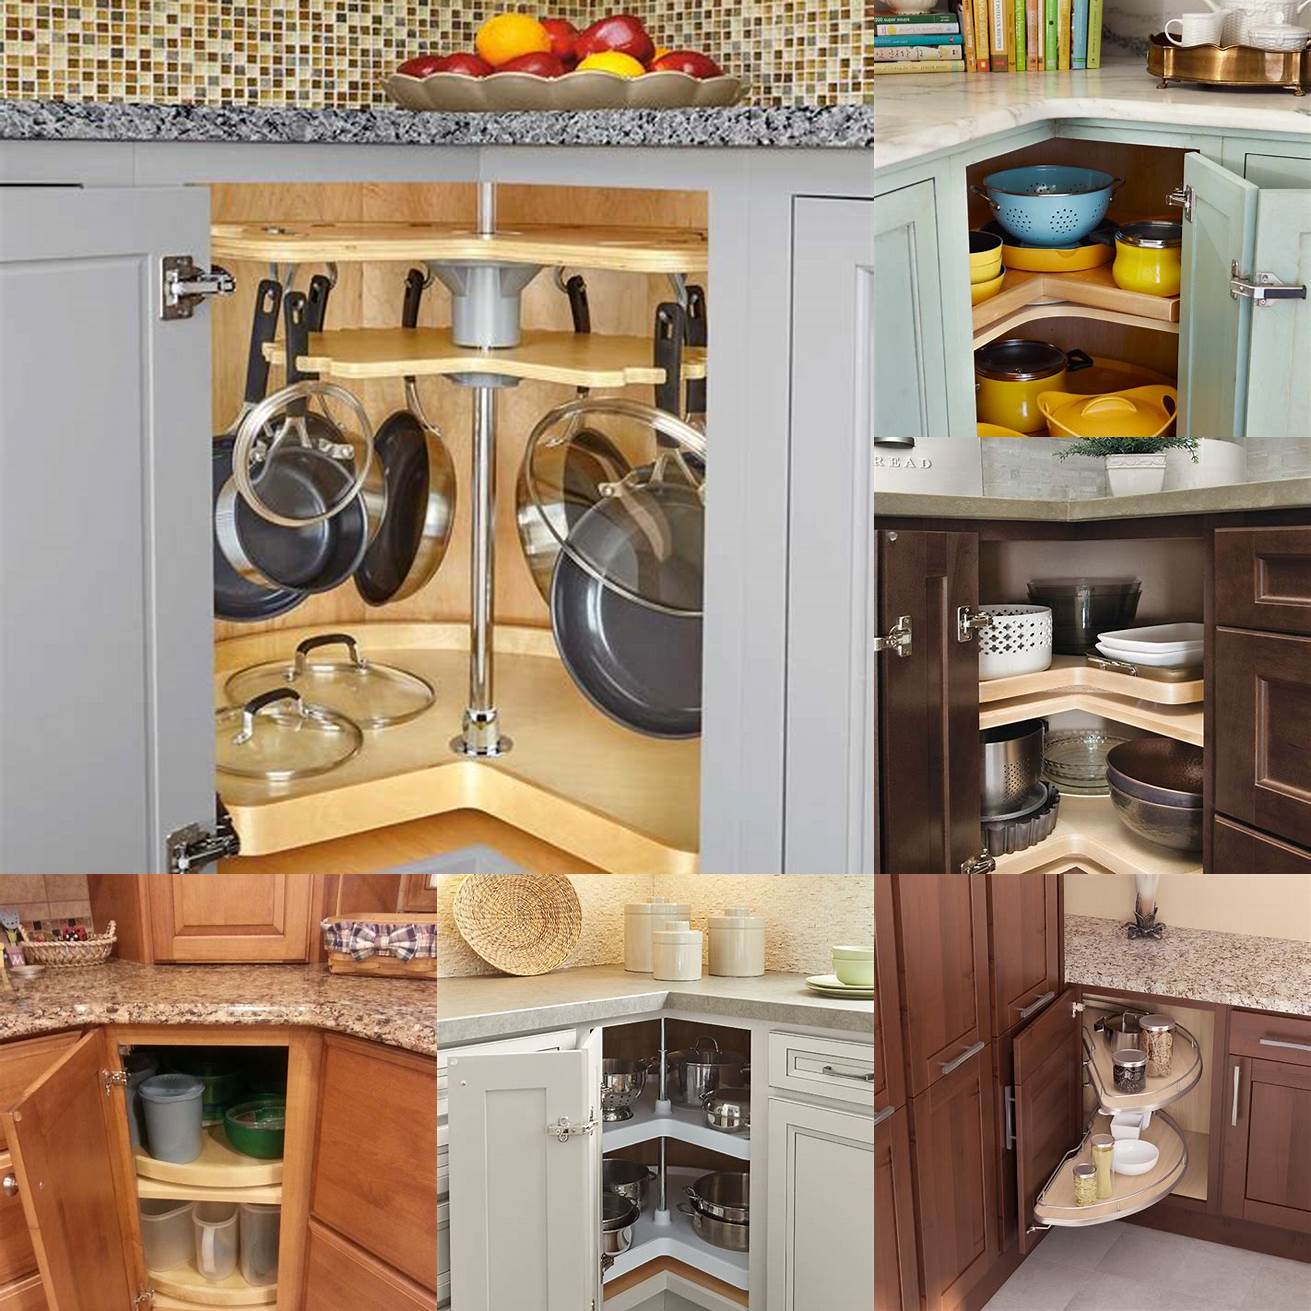 Lazy Susan a classic way to maximize corner cabinet space